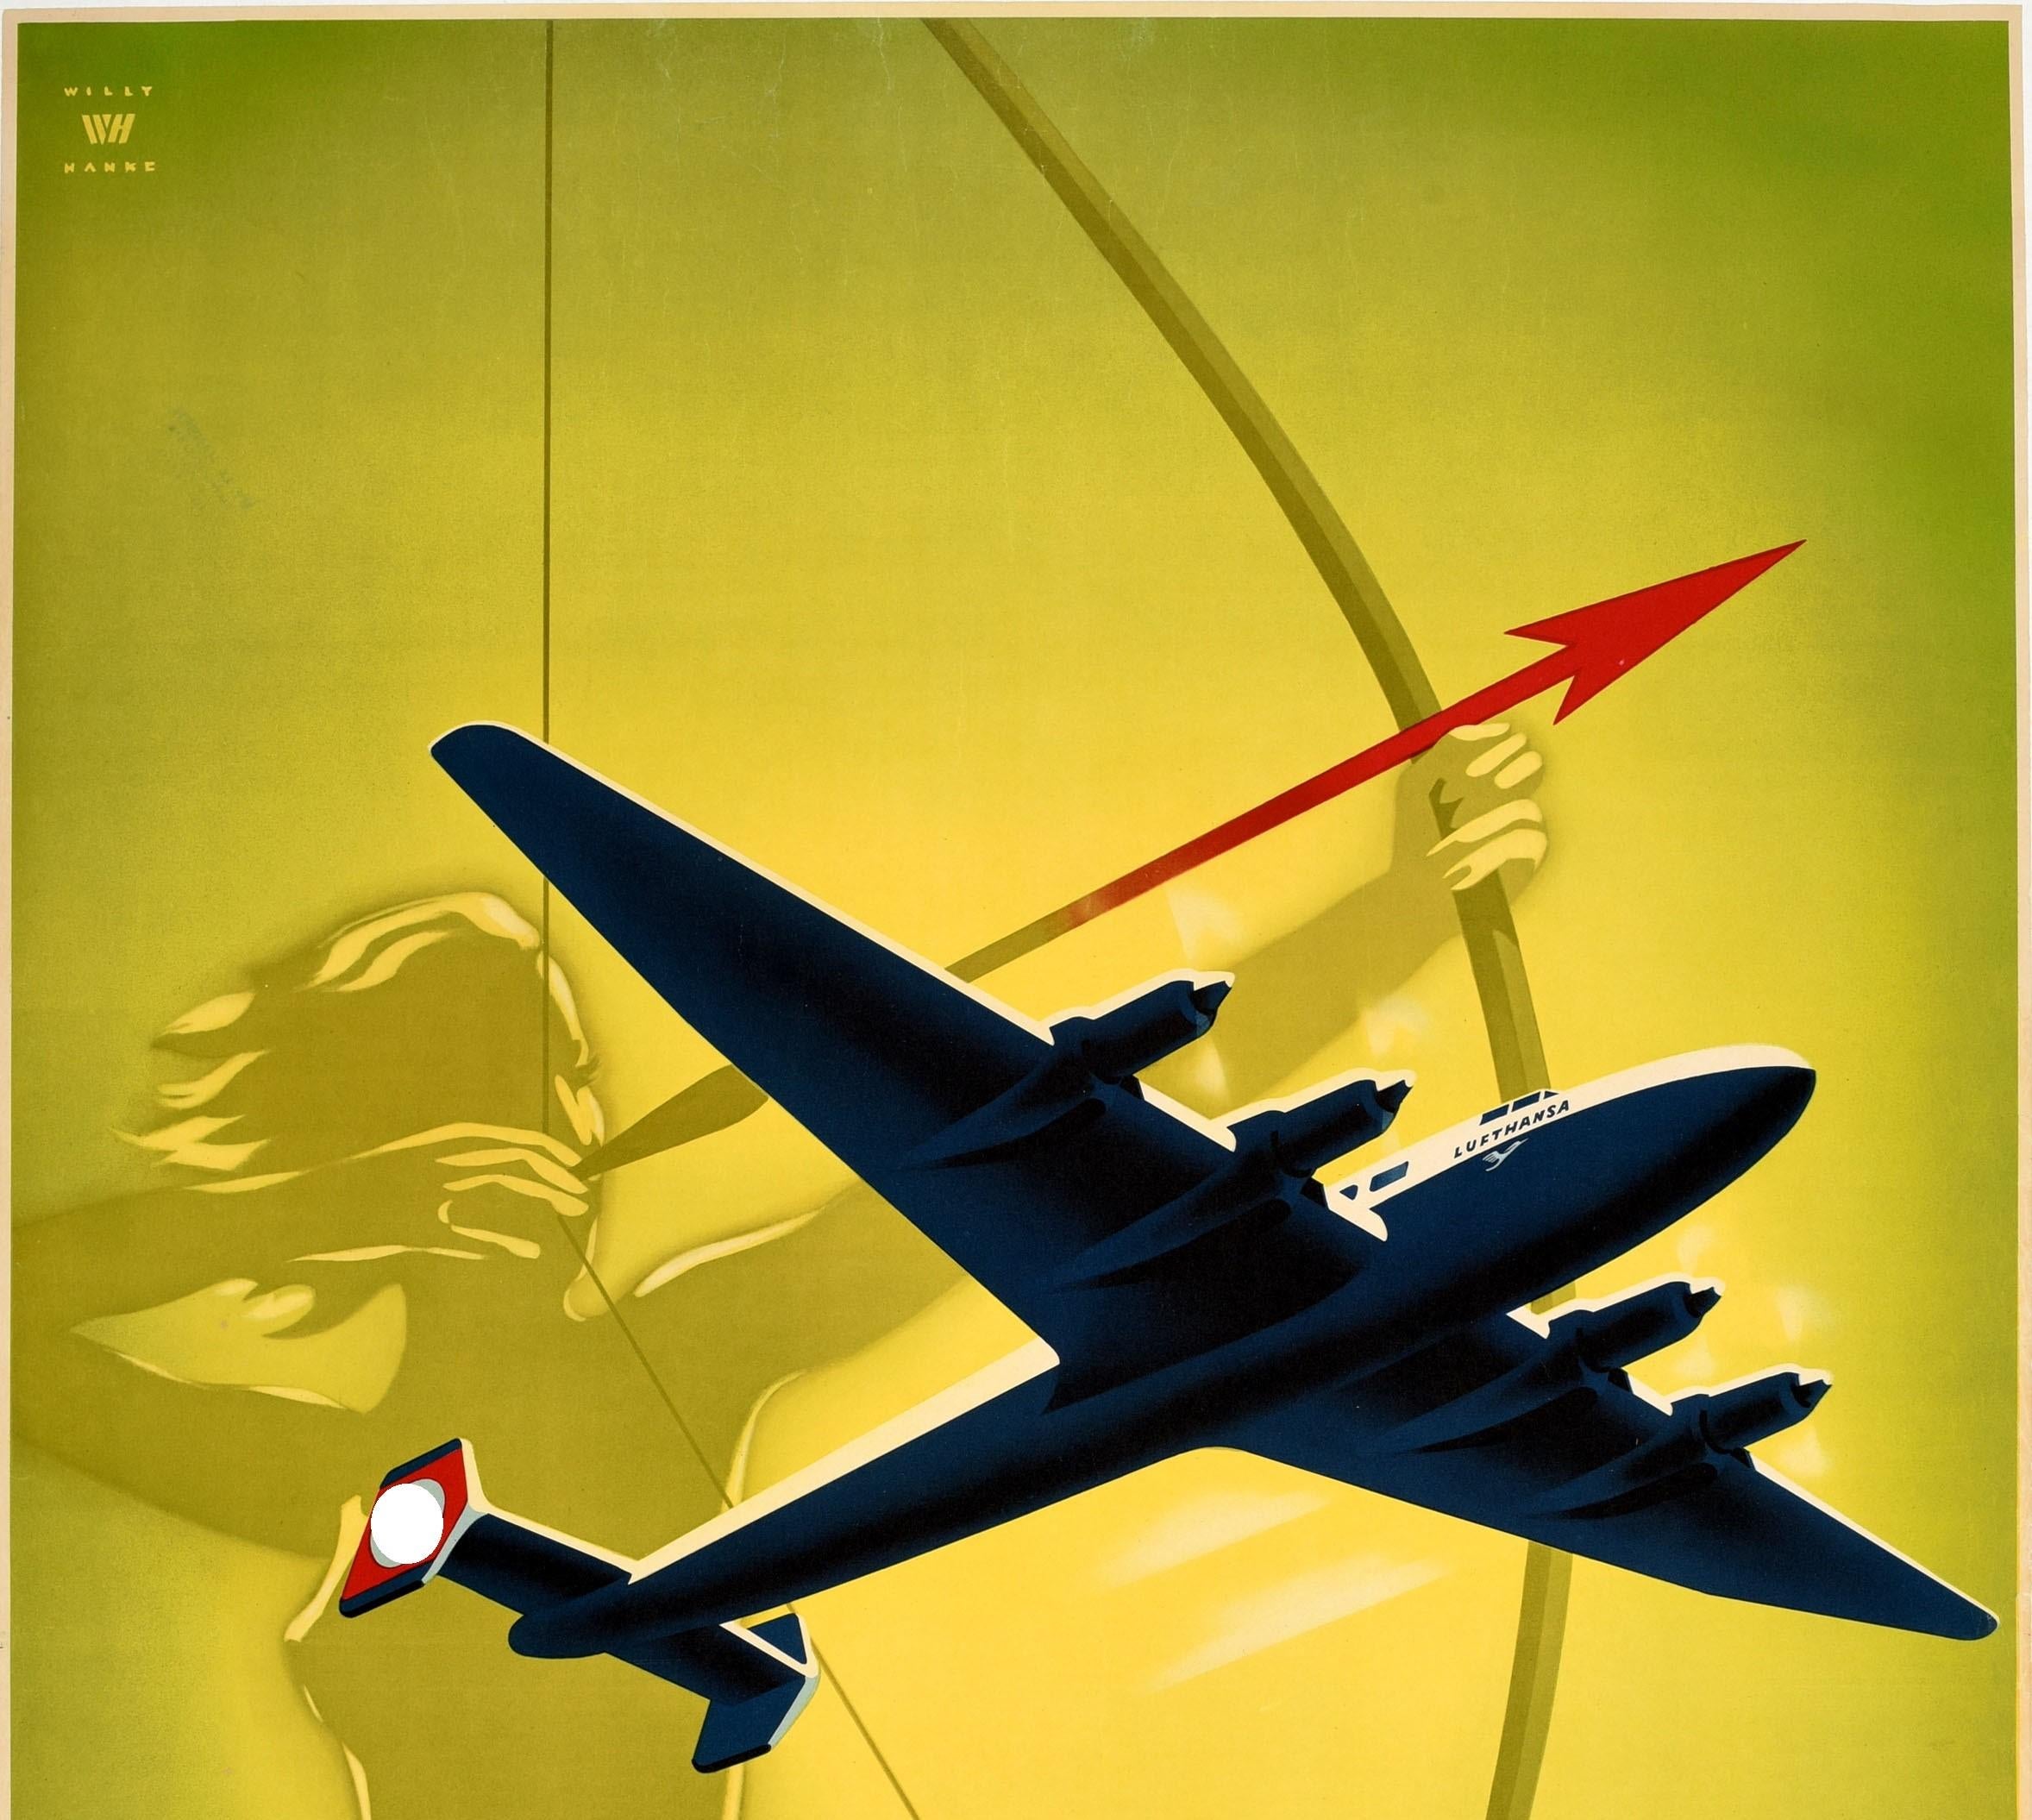 Original vintage travel poster advertising Deutsche Lufthansa featuring a dynamic Art Deco style illustration of a propeller plane marked with the Lufthansa crane logo and German Nazi swastika flag (*) on the tail, flying at speed in front of an